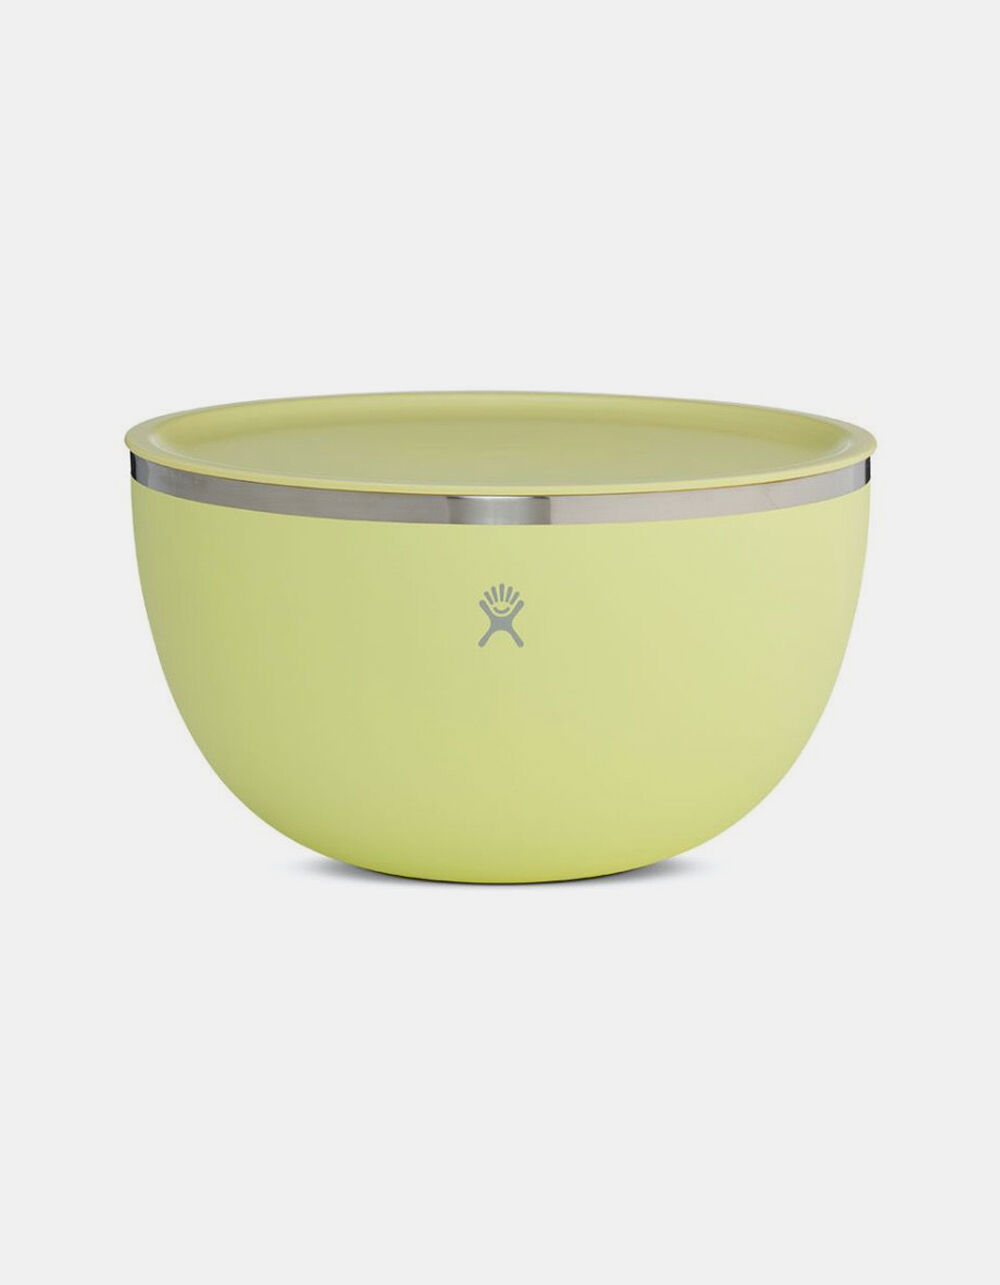 HYDRO FLASK Pineapple 5 Qt Serving Bowl with Lid